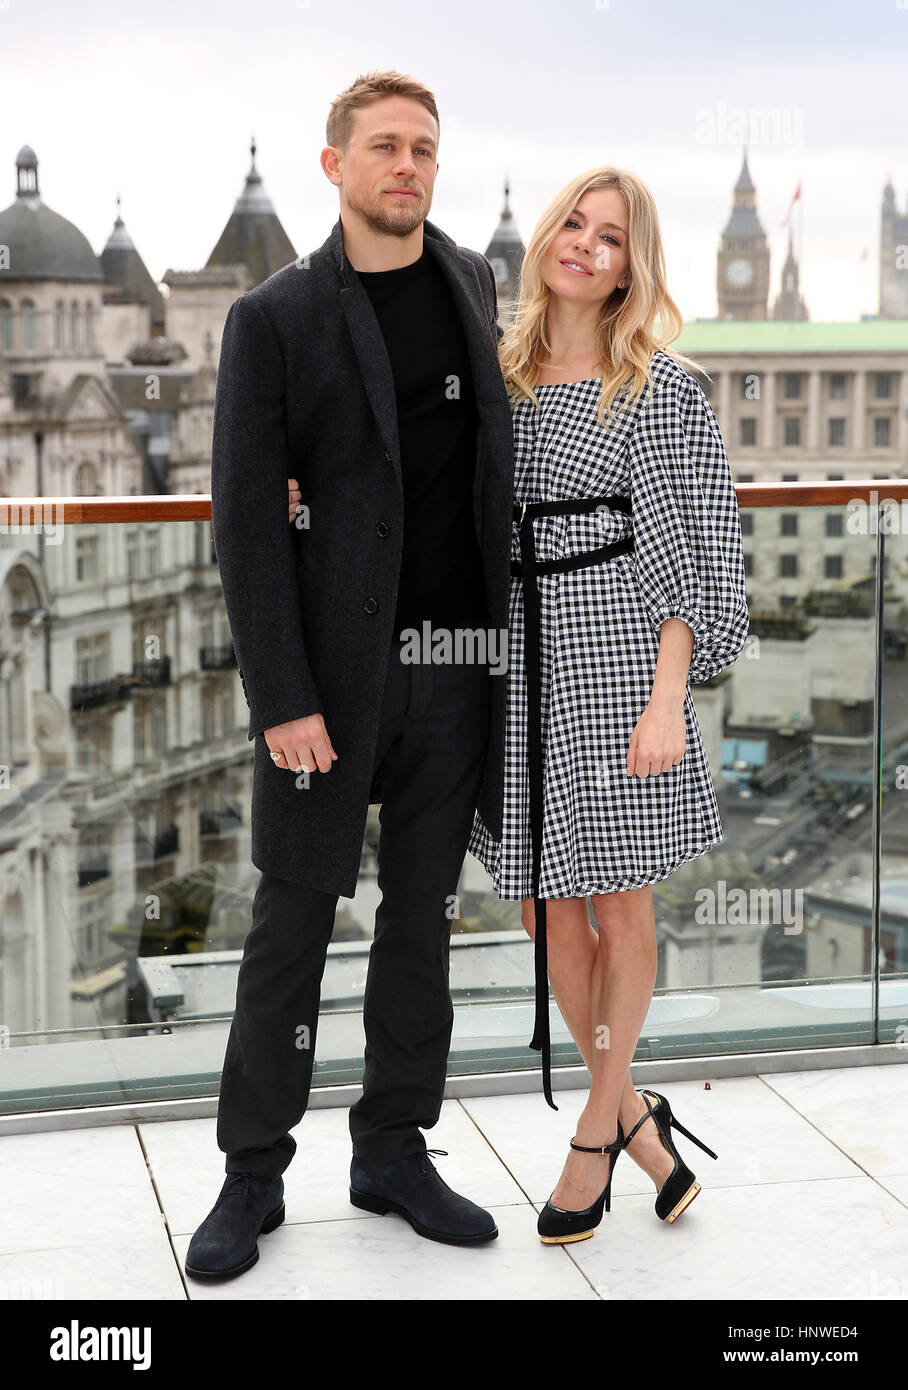 Charlie Hunnam and Sienna Miller attending 'The Lost City Of Z' Photocall  at The Corinthia Hotel, London. PRESS ASSOCIATION Photo. Picture date:  Thursday 16th February, 2017. Photo credit should read: Isabel Infantes/PA